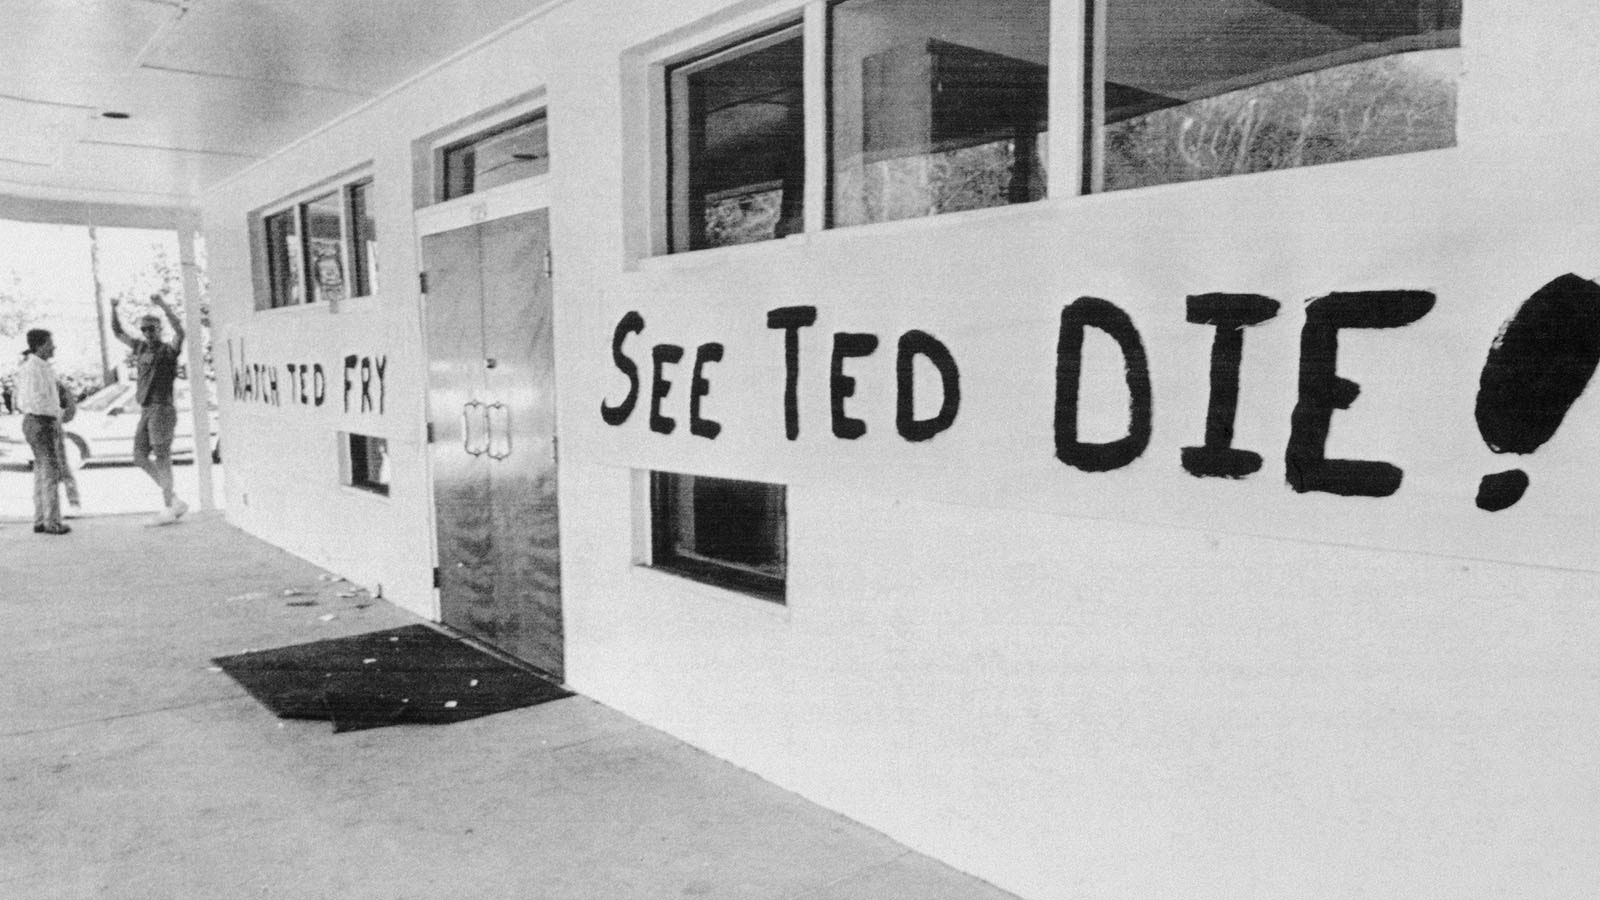 Florida State University's Chi Phi fraternity celebrates the execution of Ted Bundy with a large banner that says, "Watch Ted Fry, See Ted Die!" as they prepare for an evening cookout where they will serve "Bundy burgers" and "electrified hot dogs." Bundy attacked five women and killed two Chi Omega coeds on the campus in 1978.